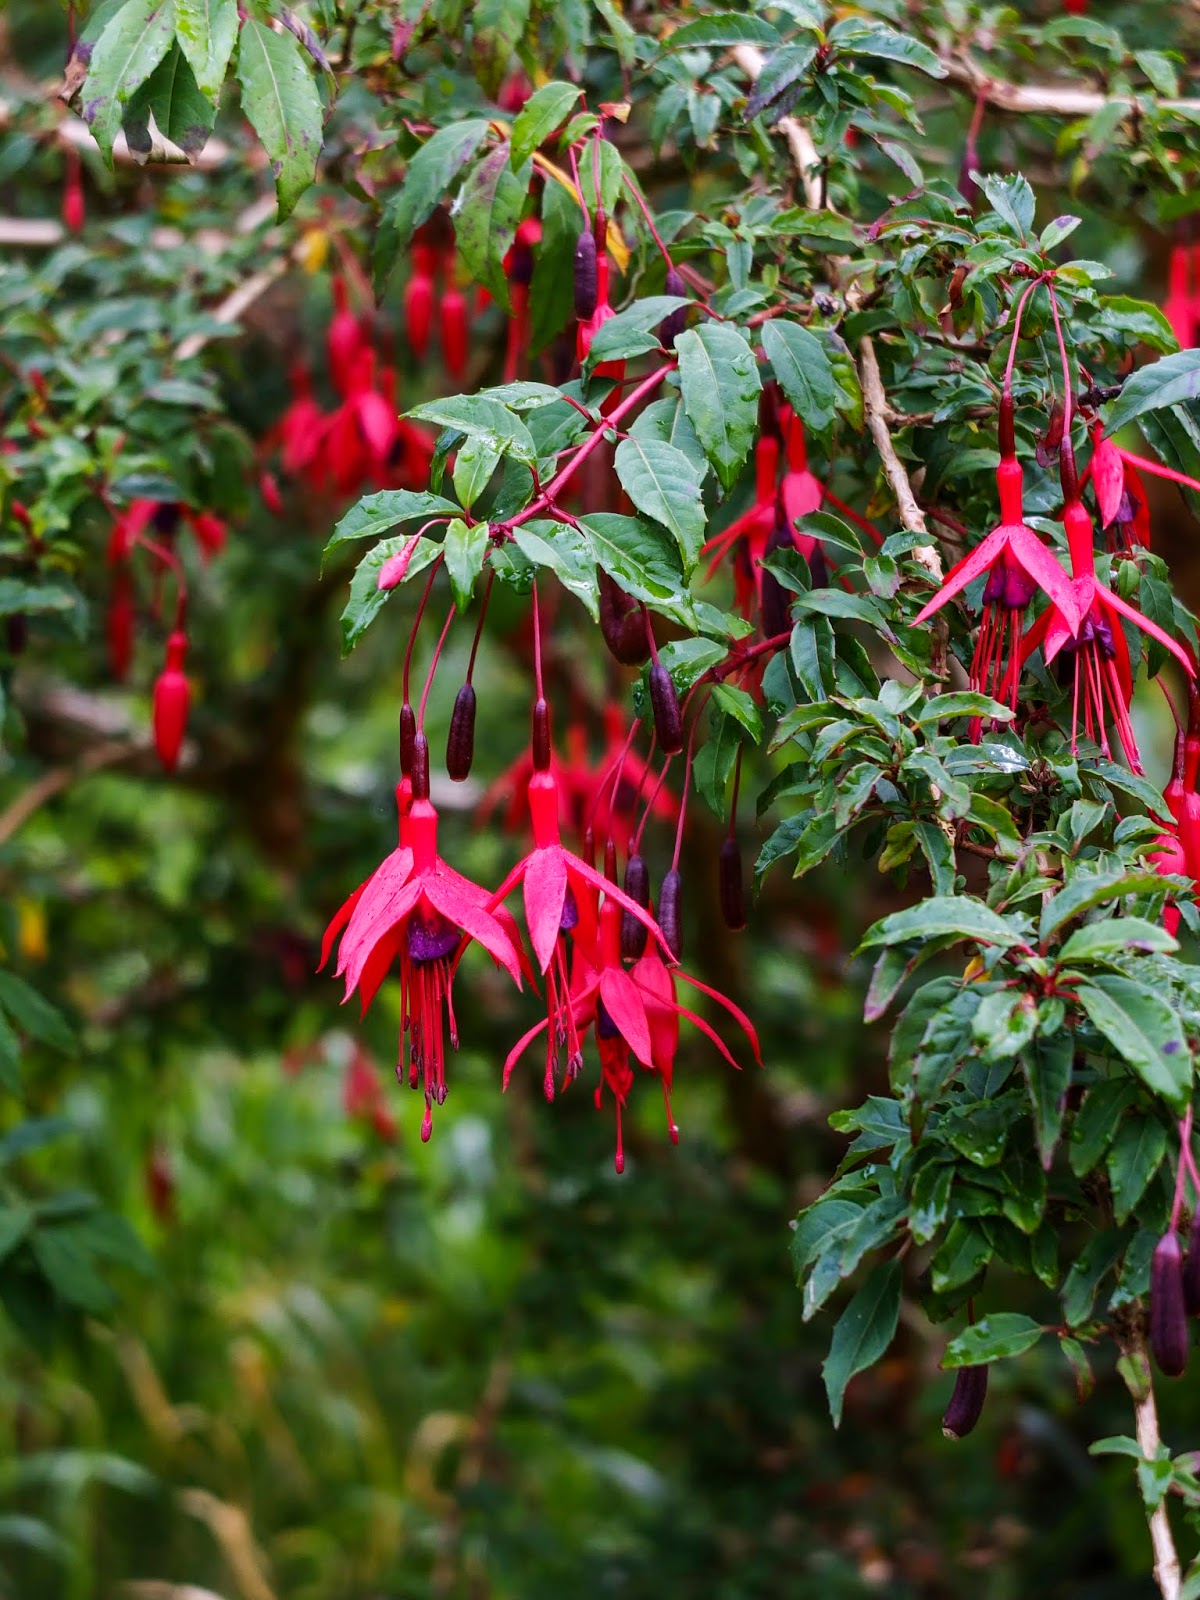 Red fuchsia flowers hanging from the shrub.